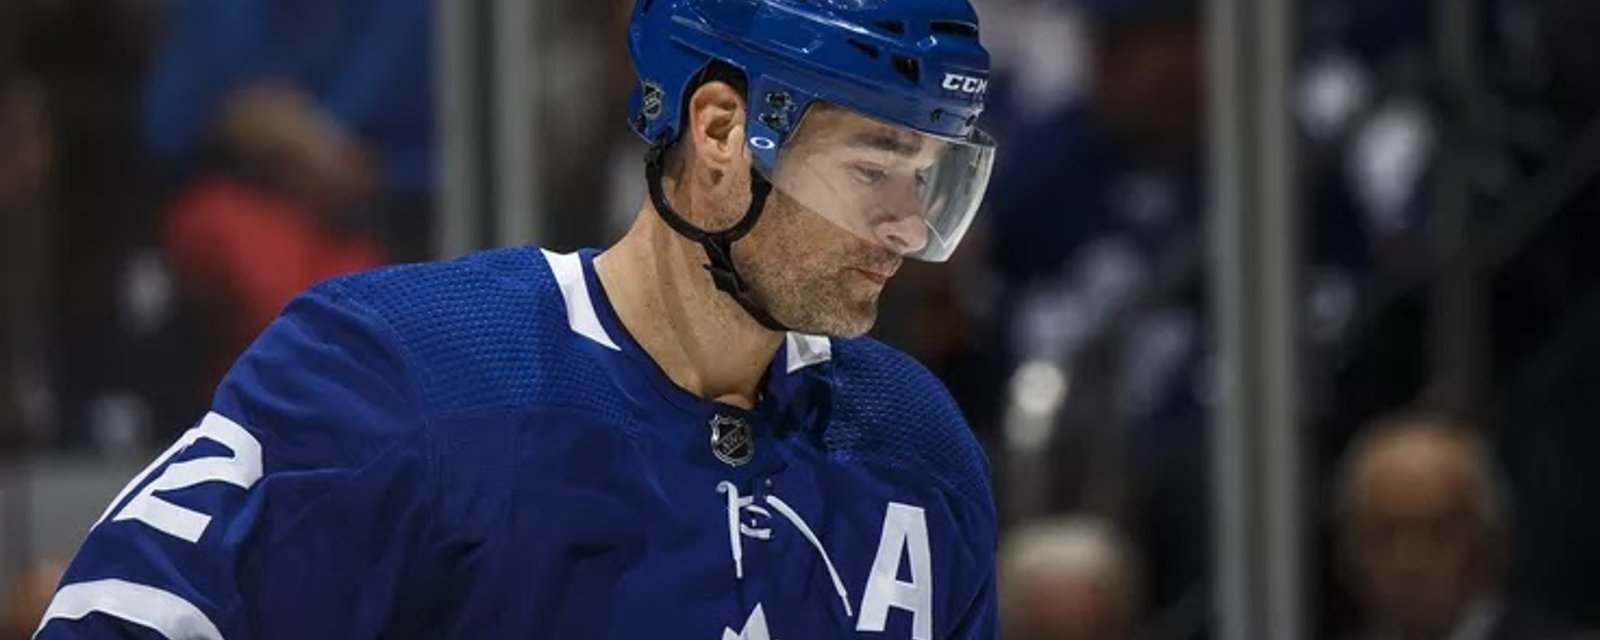 Latest development proves Marleau is preparing for trade out of Toronto